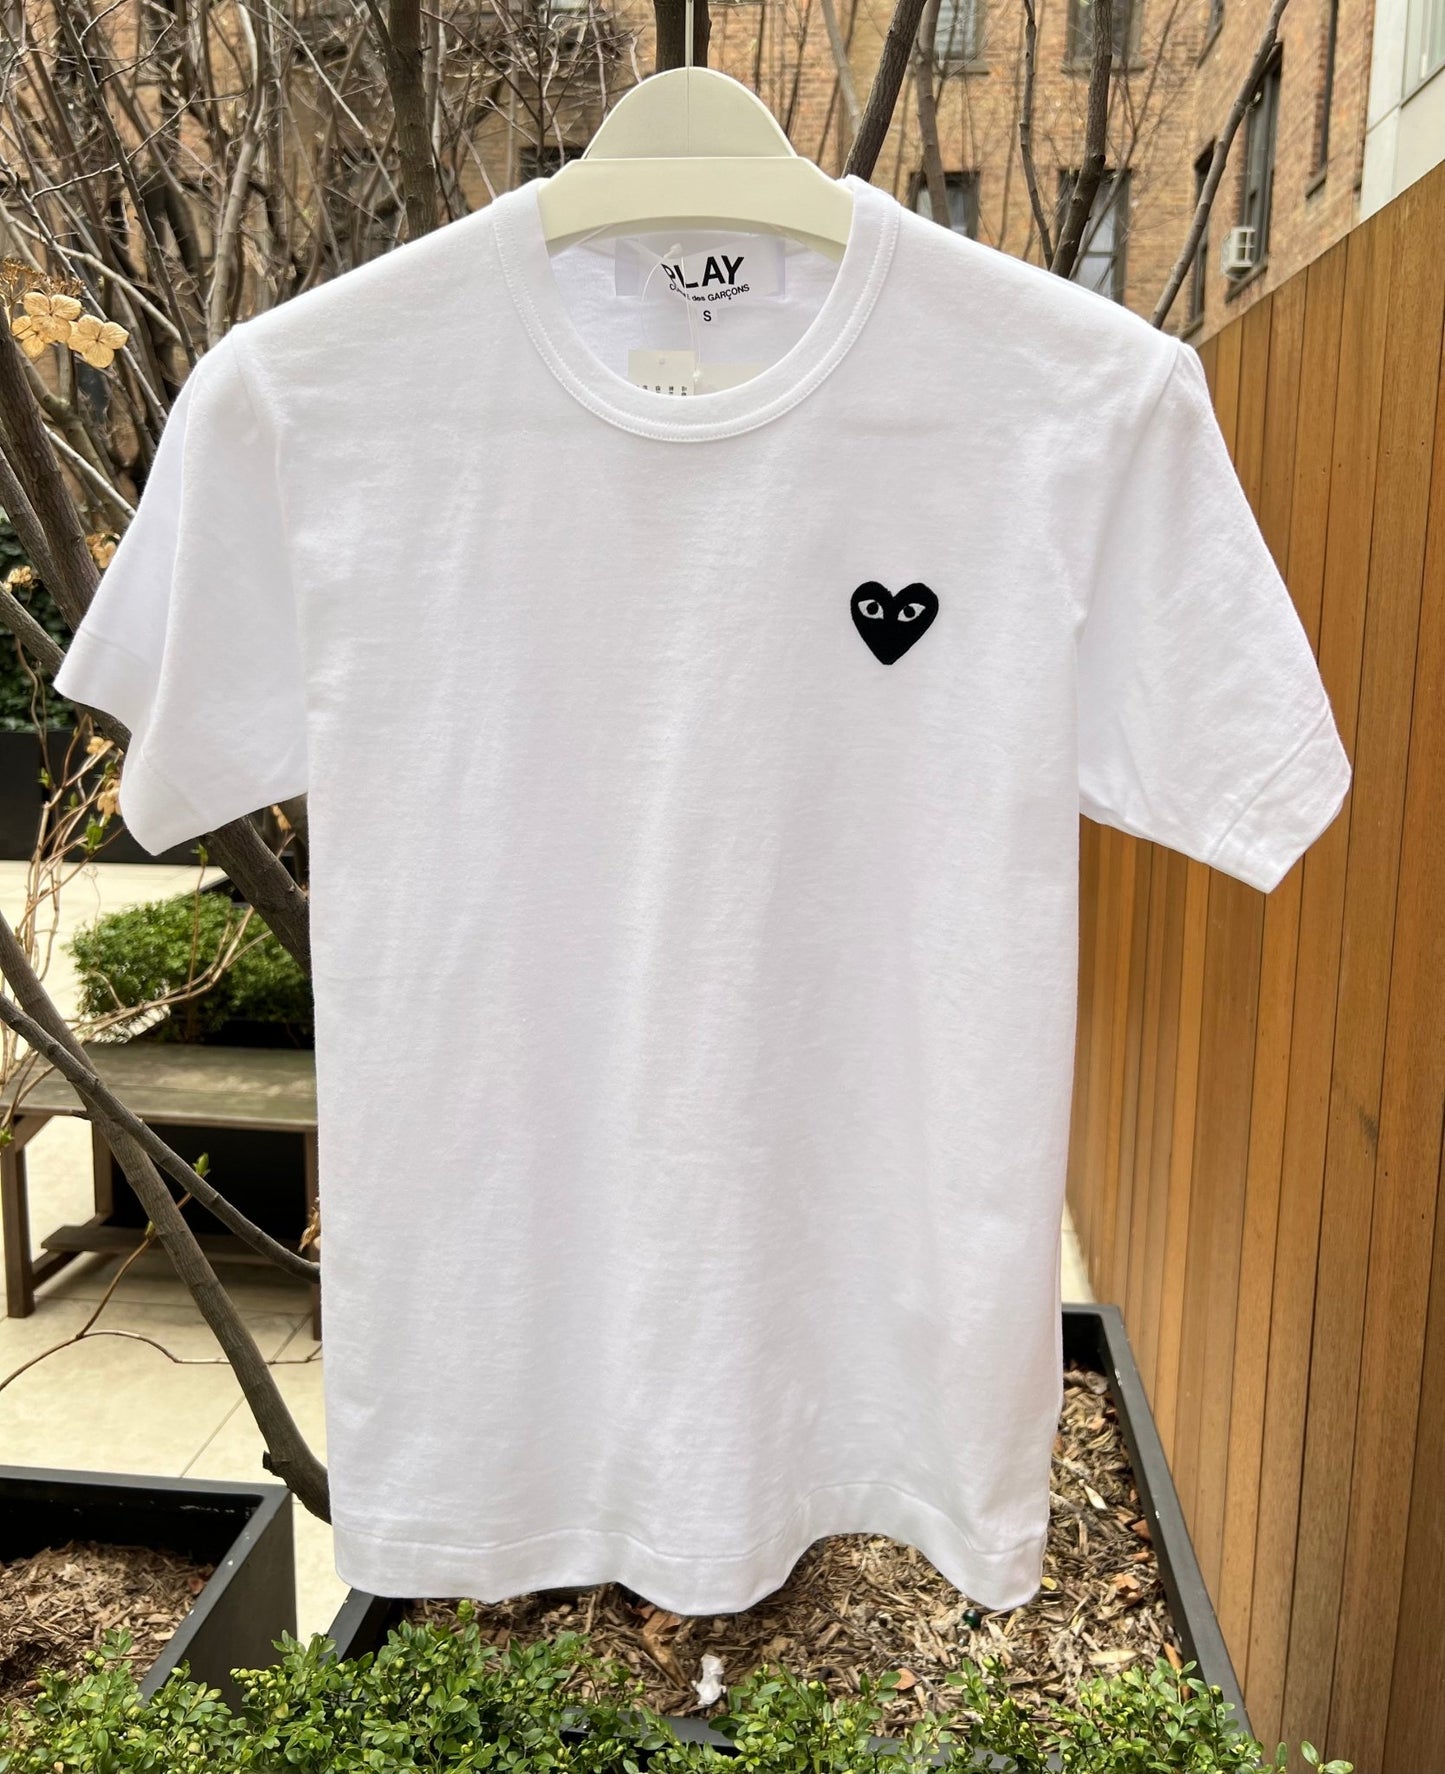 A COMME DES GARCONS COMMES DES GARCONS P1T064 PLAY T-SHIRT BLACK HEART BLACK, made from 100% cotton, featuring a small black heart logo design on the upper left side, is hanging on a wooden hanger outdoors.